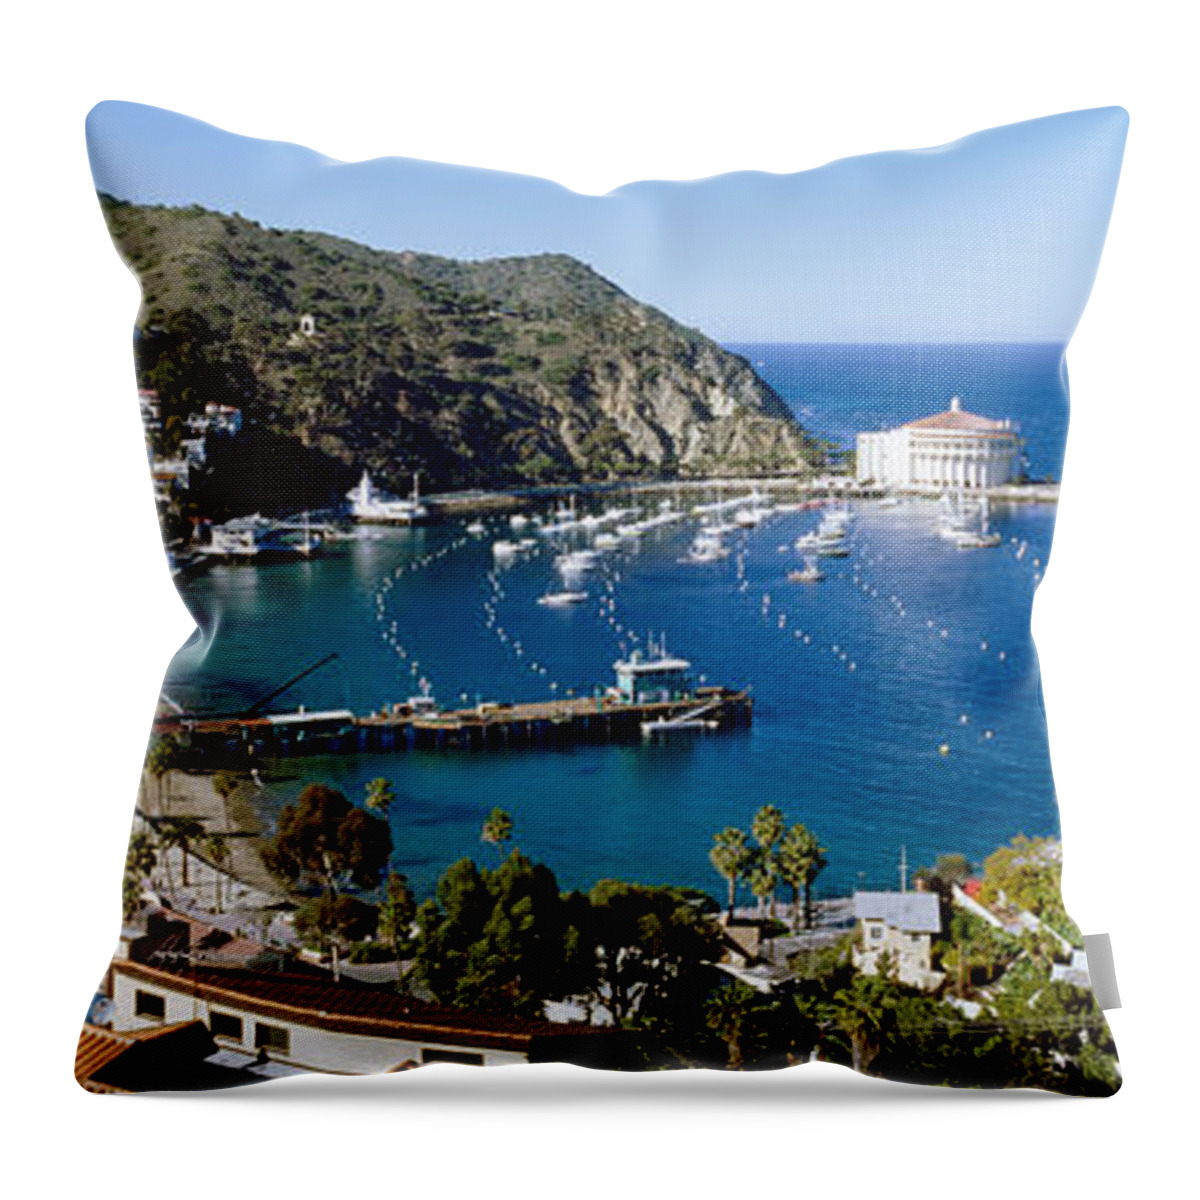 Photography Throw Pillow featuring the photograph Santa Catalina Island Ca #1 by Panoramic Images